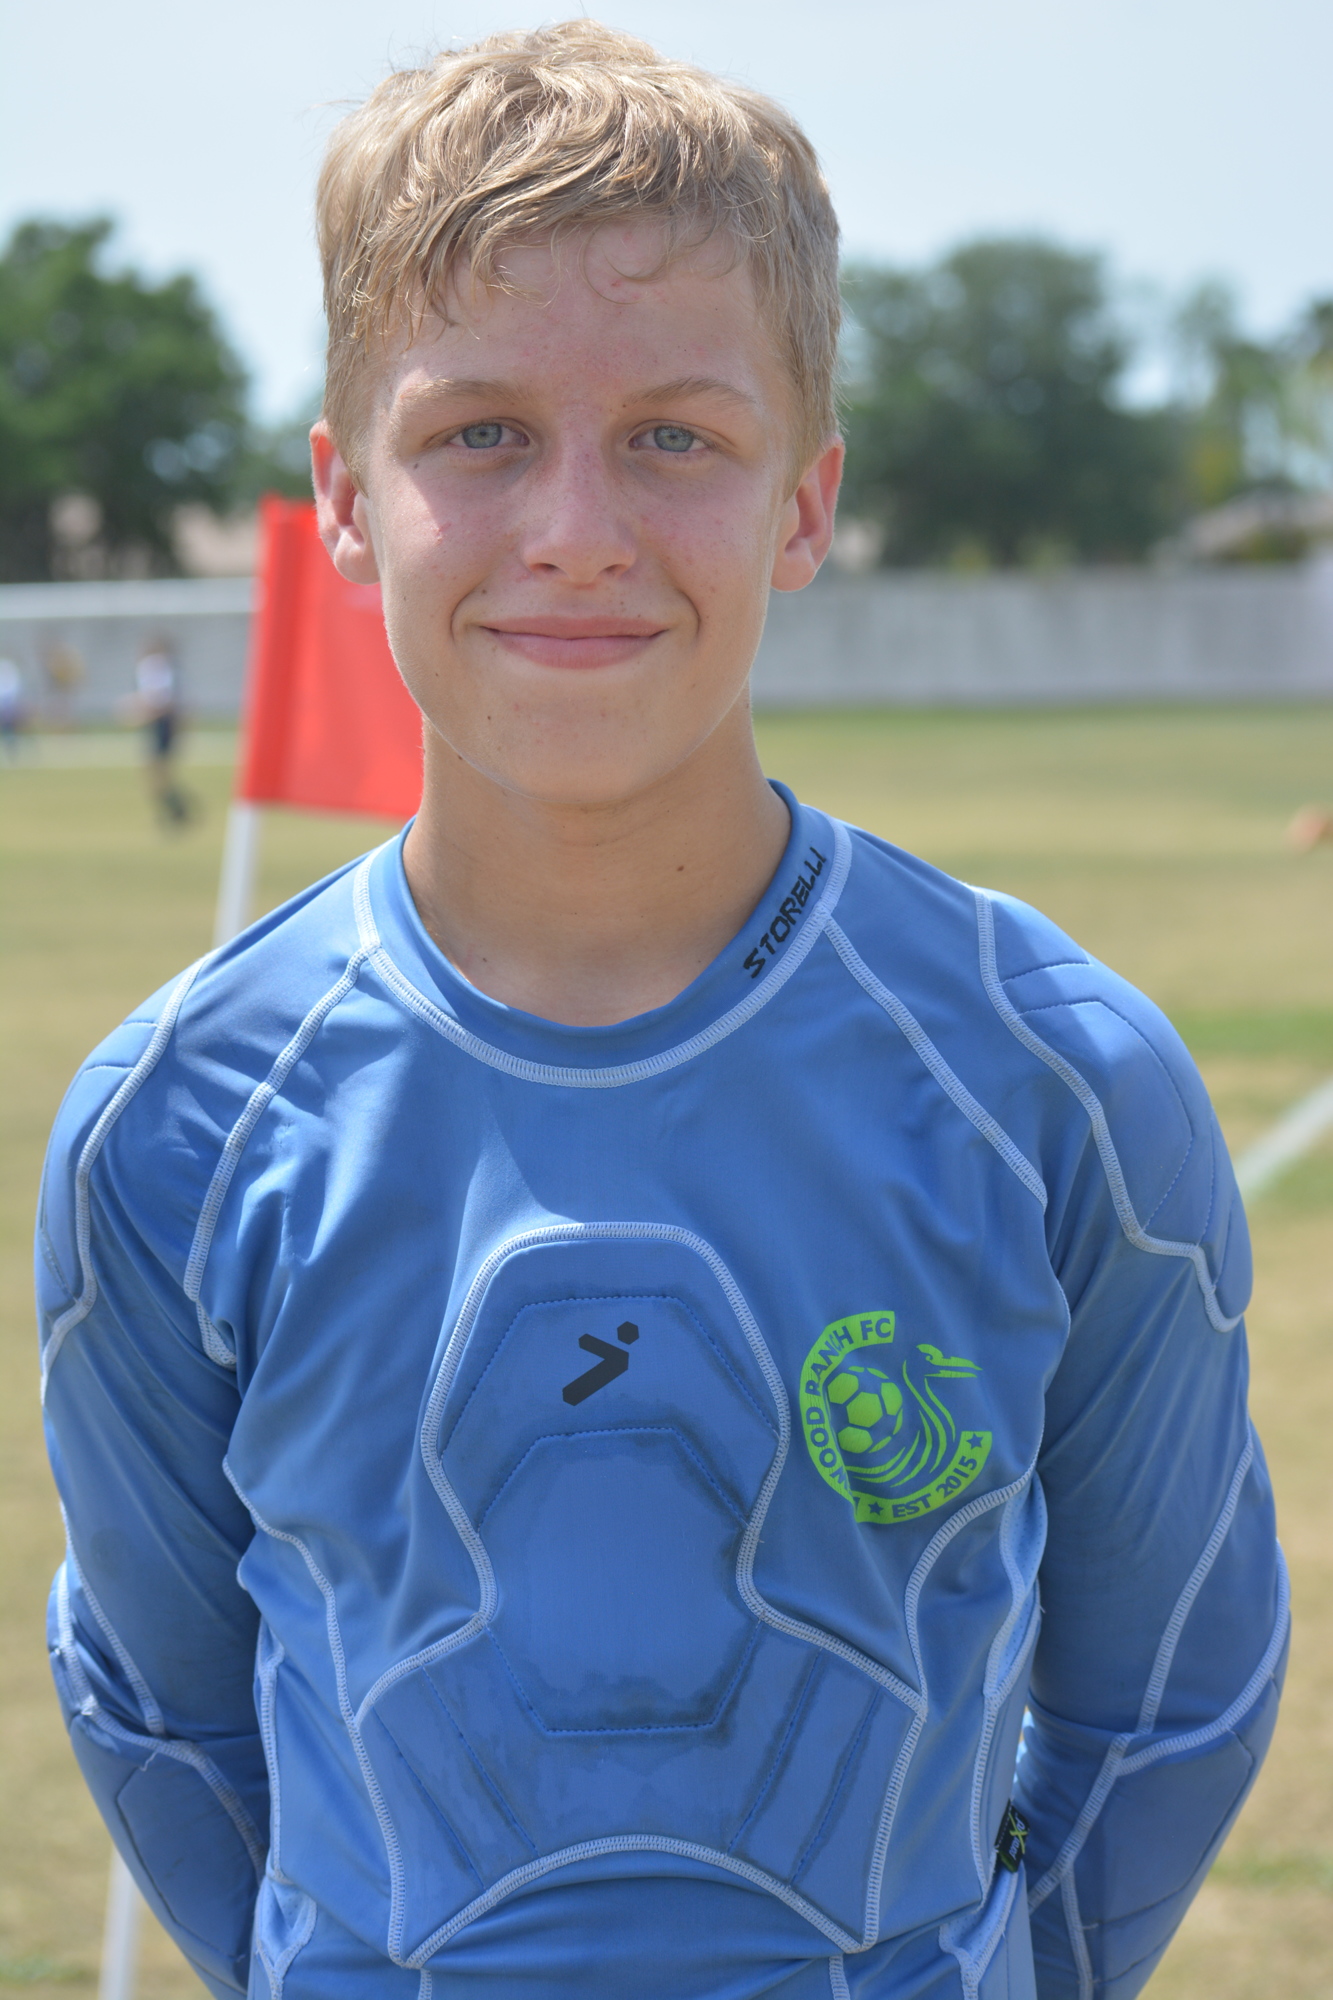 Lakewood Ranch FC's Cranes U12 goalie Christopher Schrum, 11, was strong in net during the 2019 Bradenton Cup.